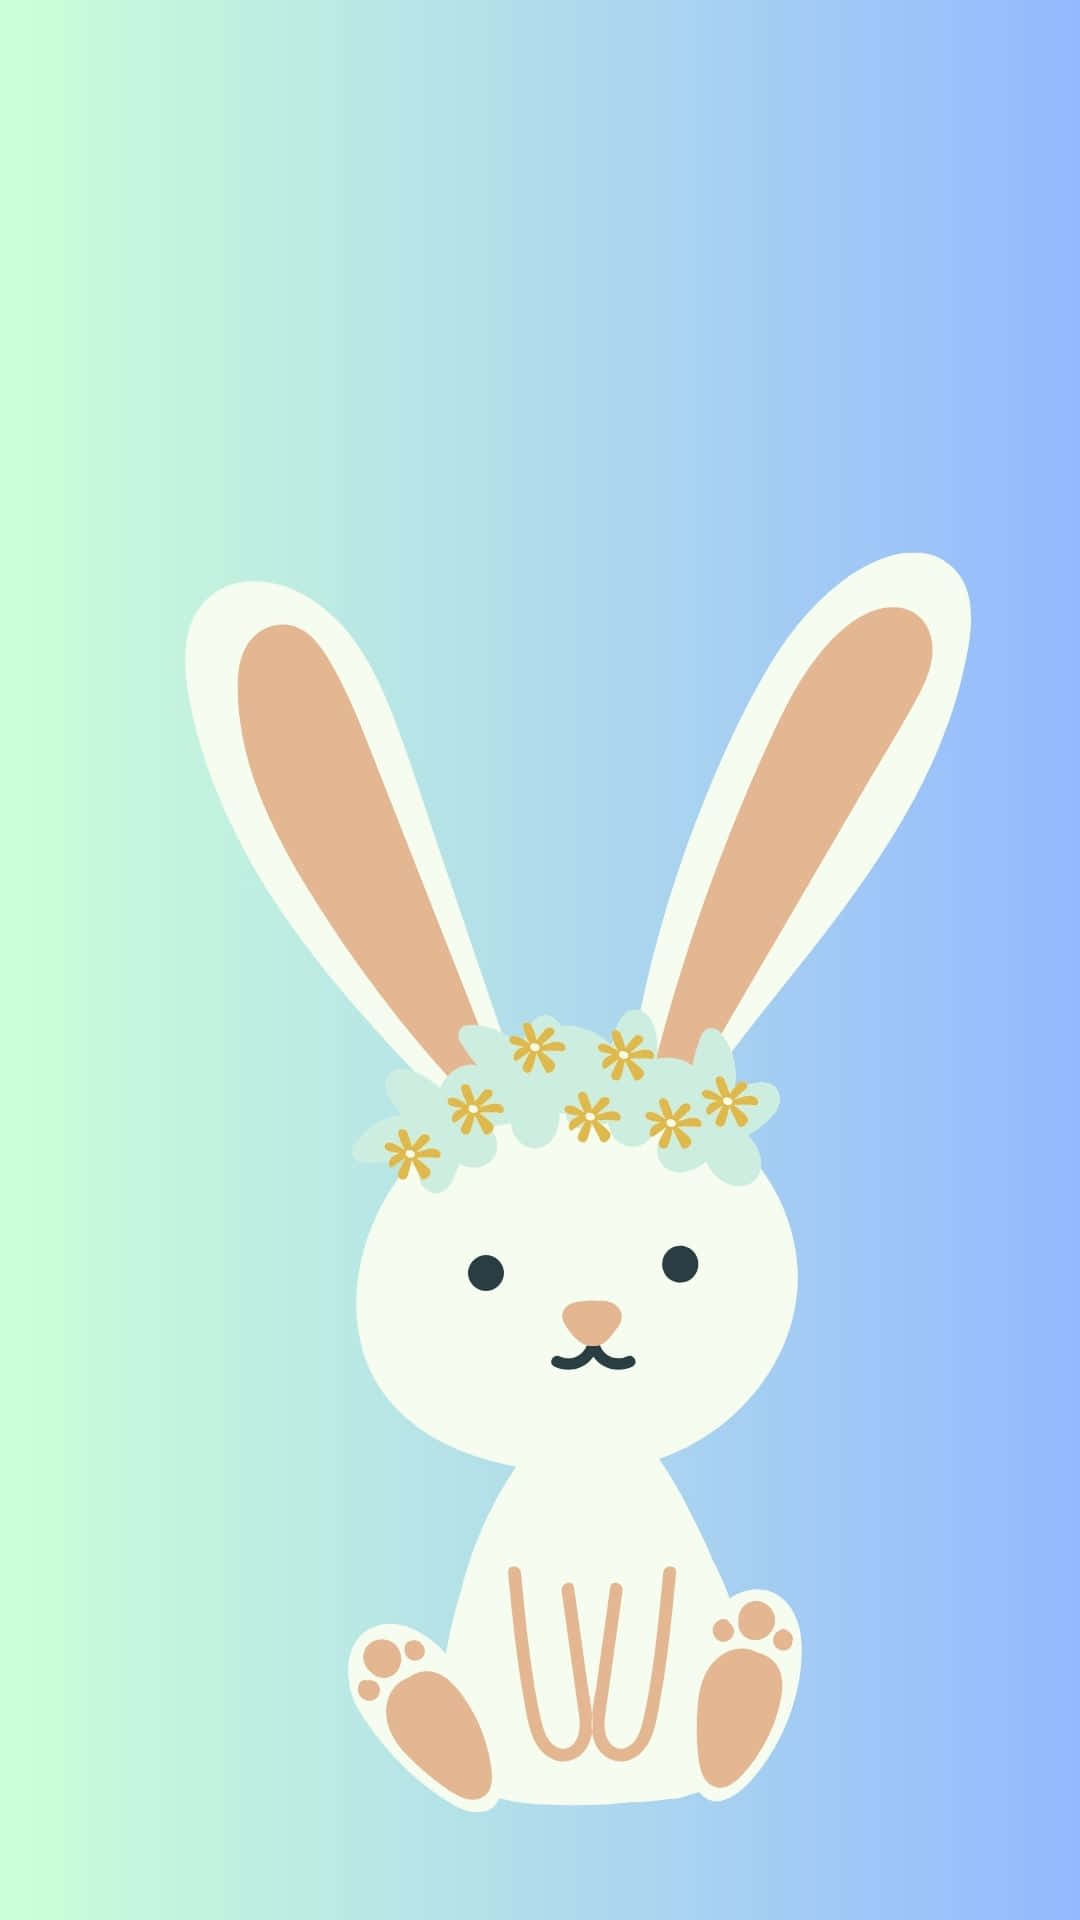 Get Ready For The Easter Party With This Fluffy Bunny!